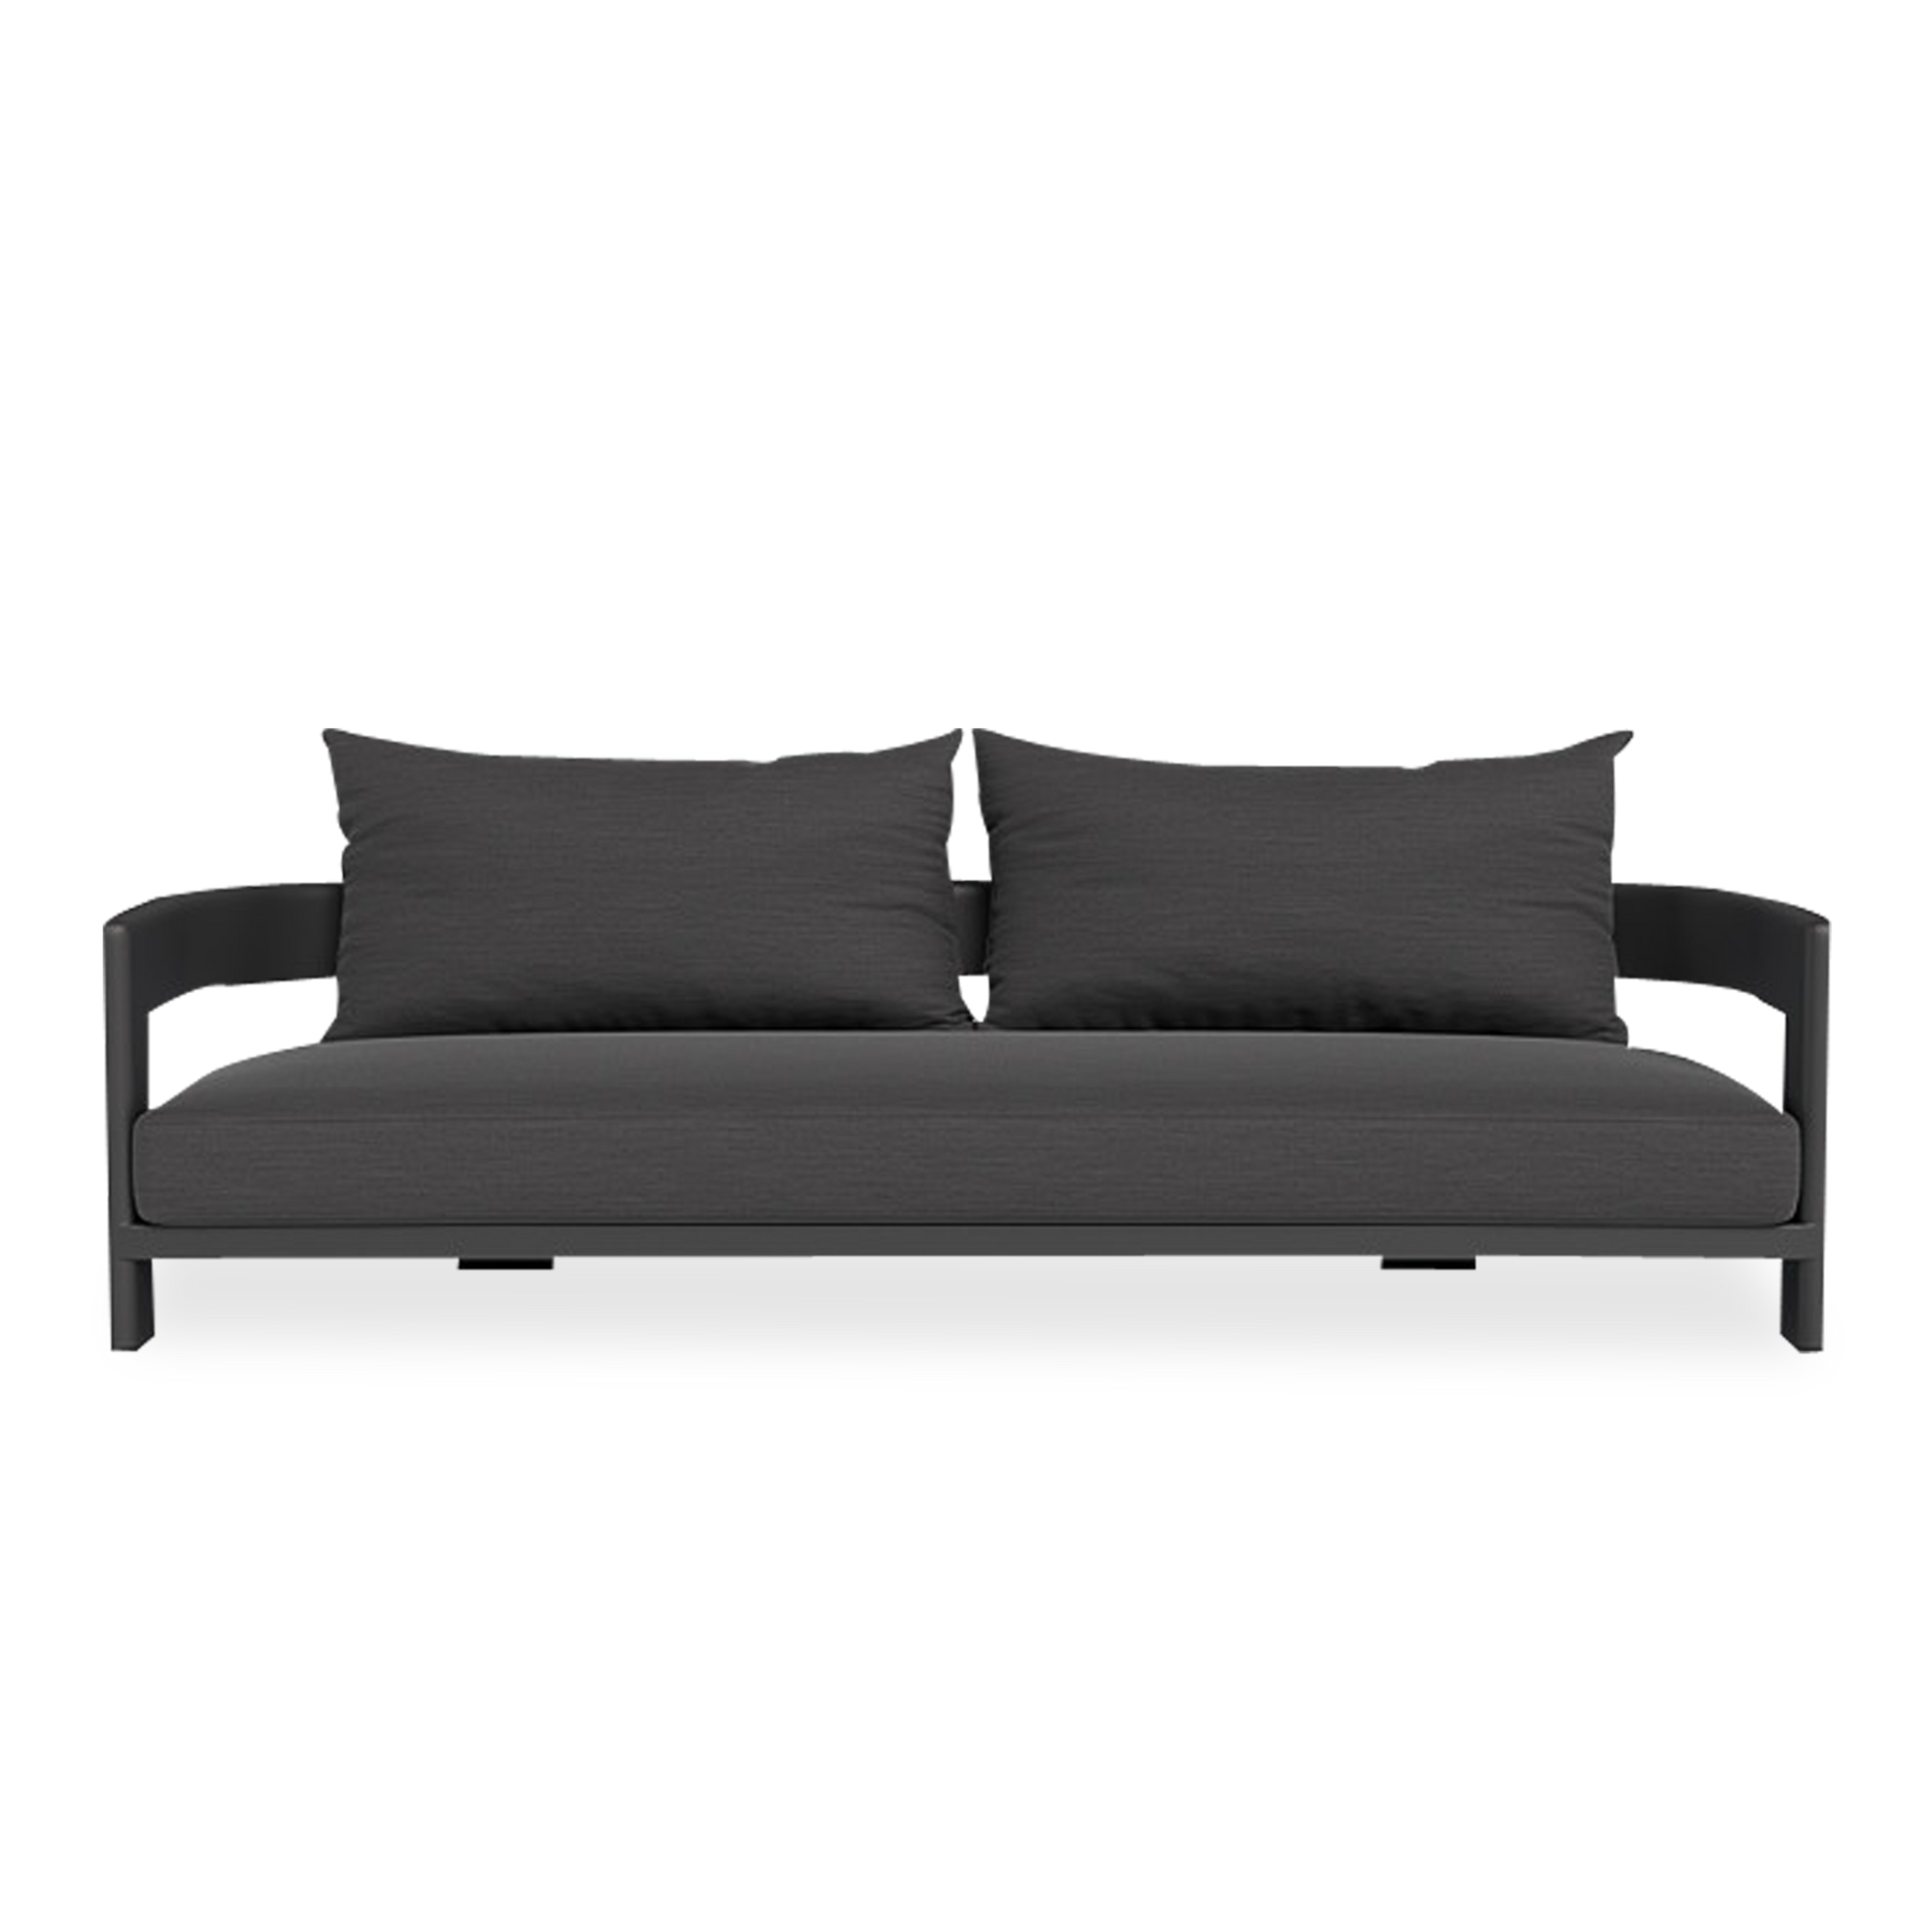 Balancing sculptural curves and right angles, the Victoria Sofa presents the true simplicity of proportion.